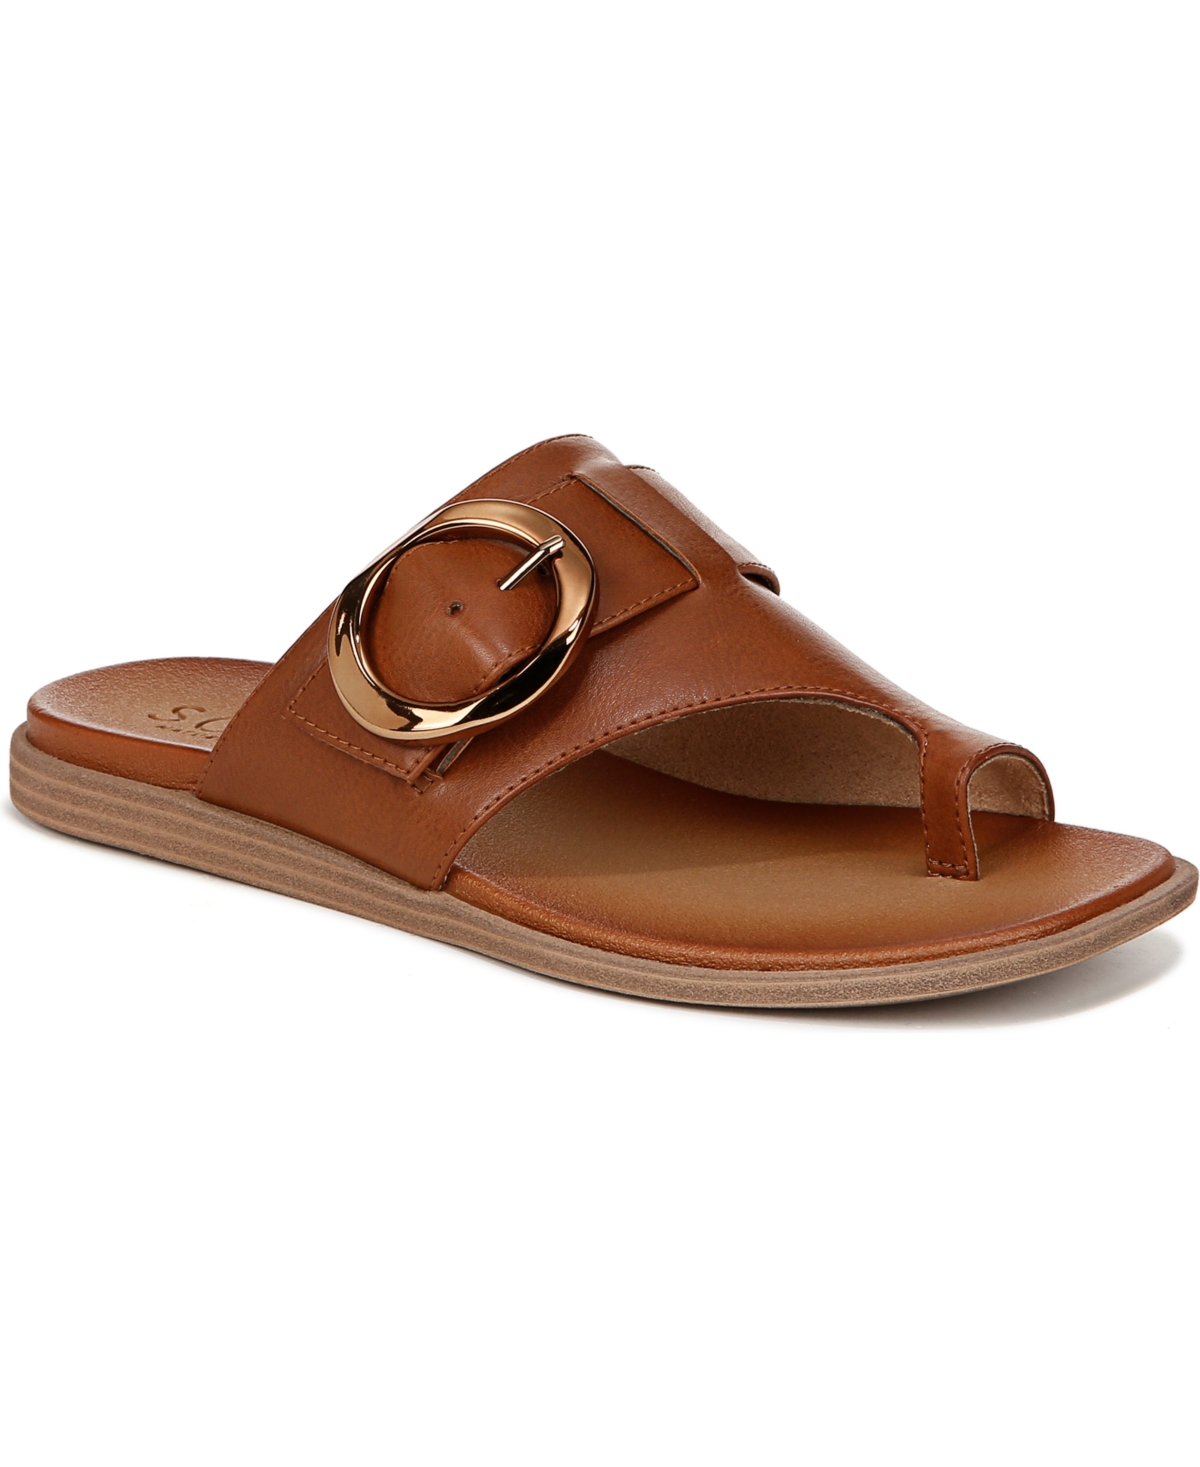 Joanie Slide Sandals - Mid Brown Faux Leather